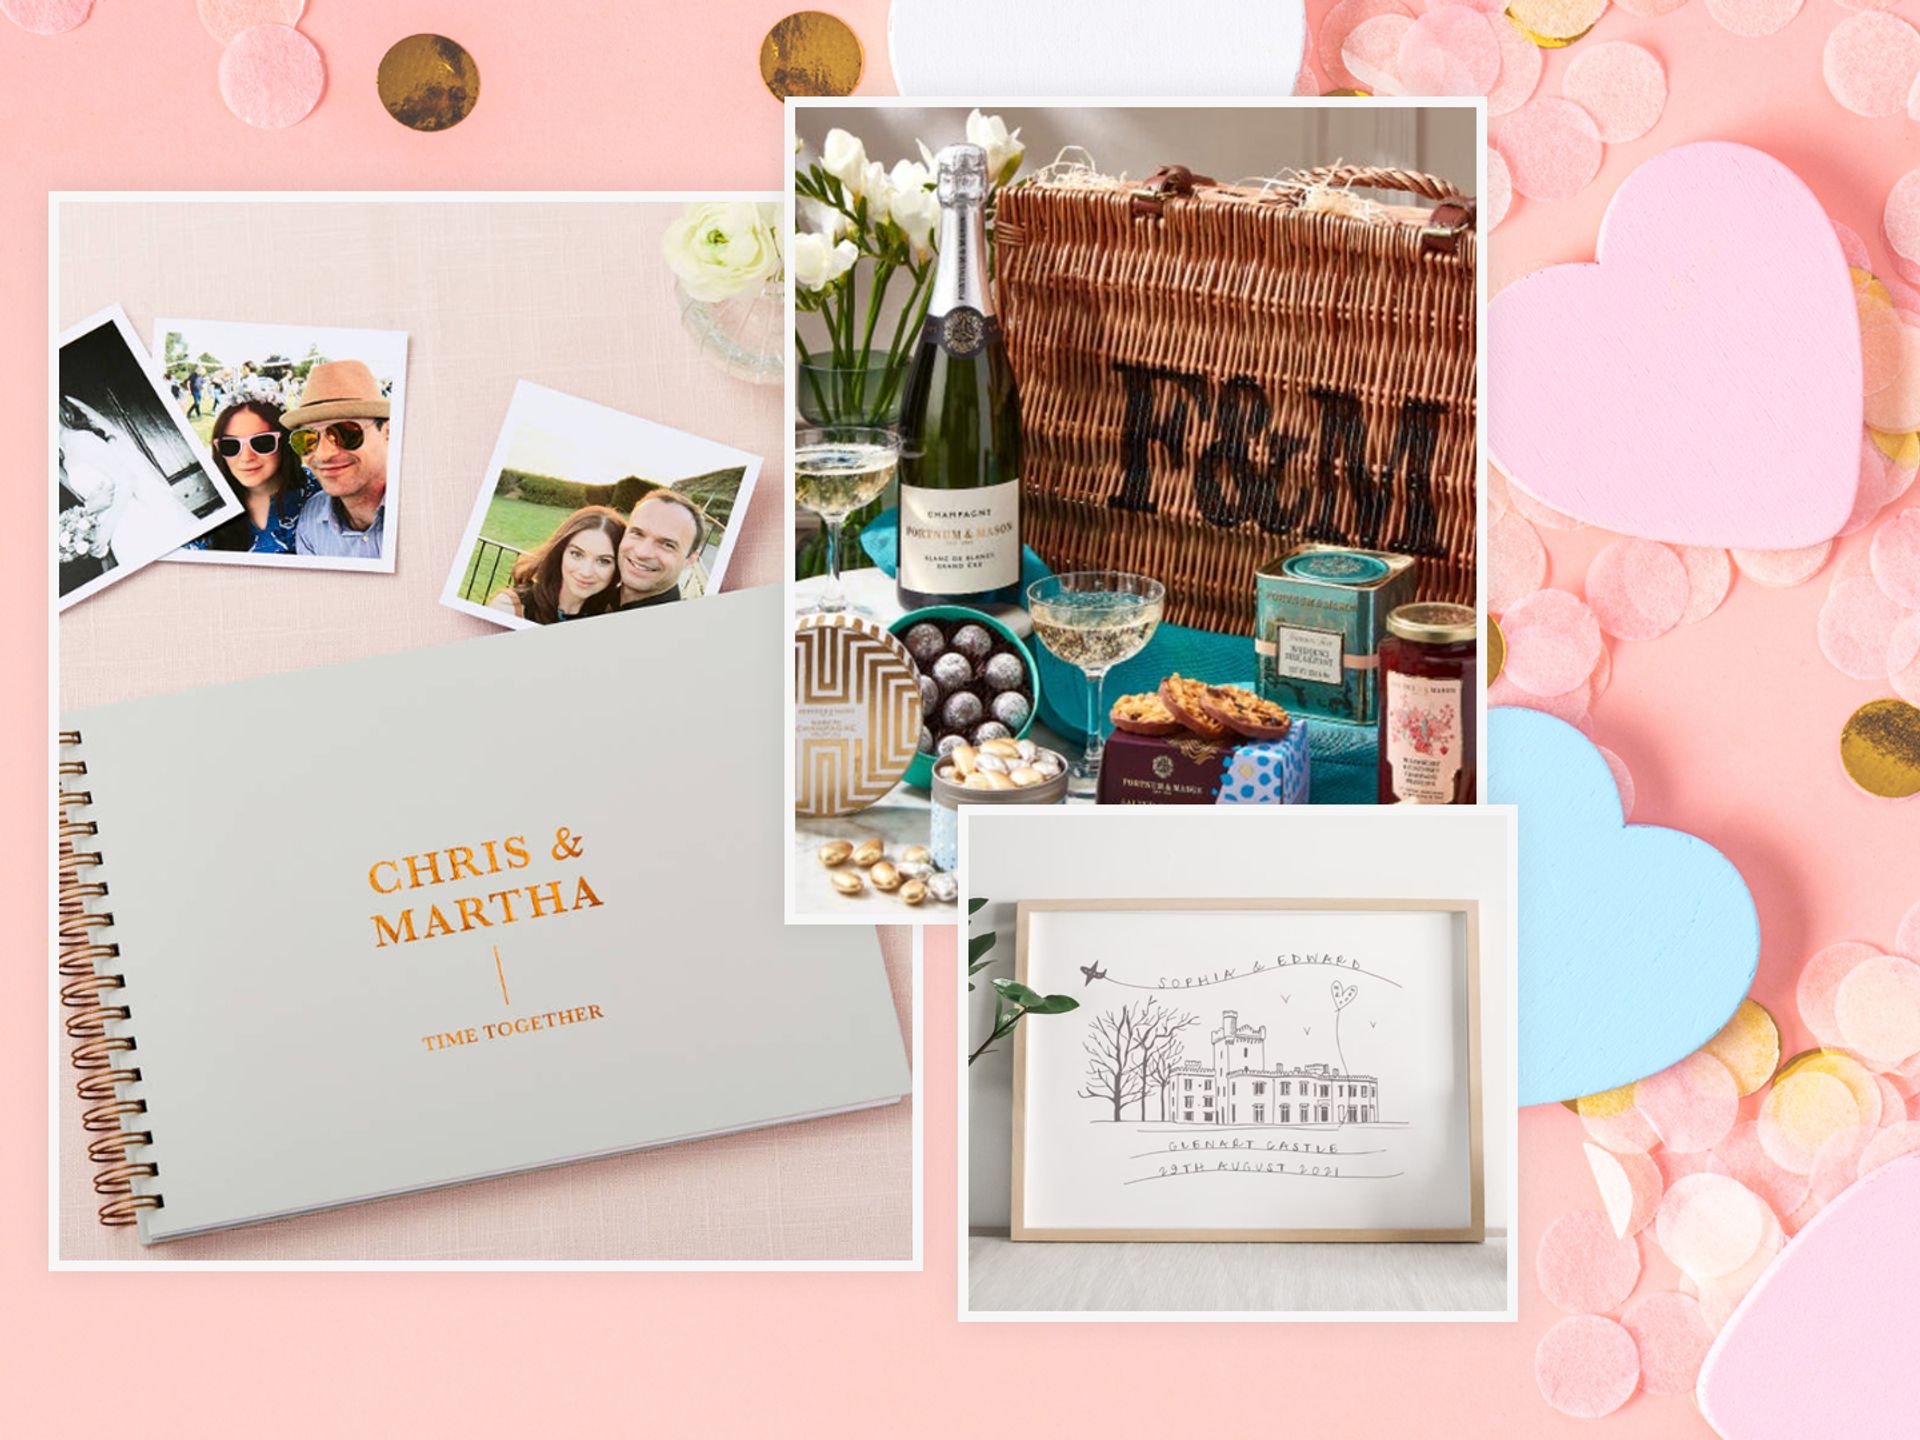 12 Wedding Favors to Thank Friends & Family